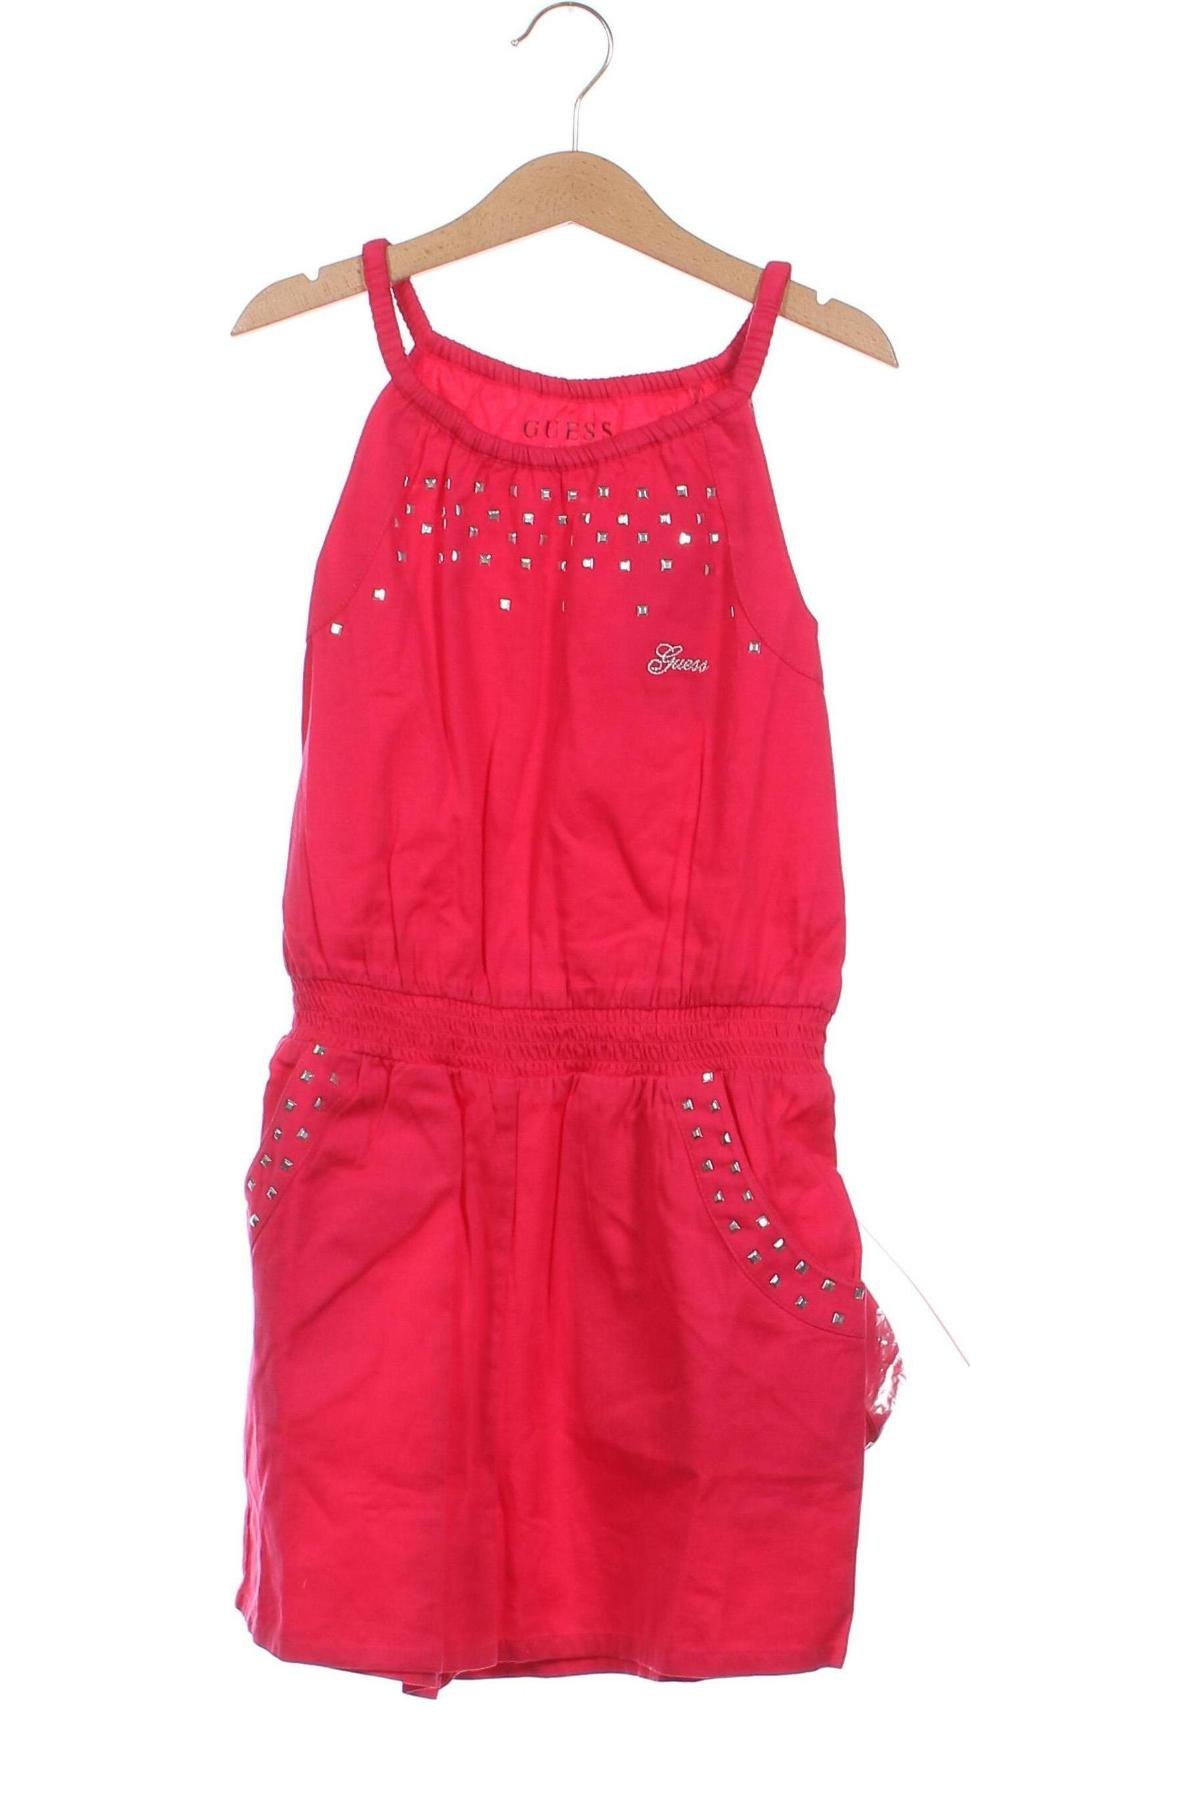 Kinder Overall Guess, Größe 9-10y/ 140-146 cm, Farbe Rosa, Preis 32,51 €